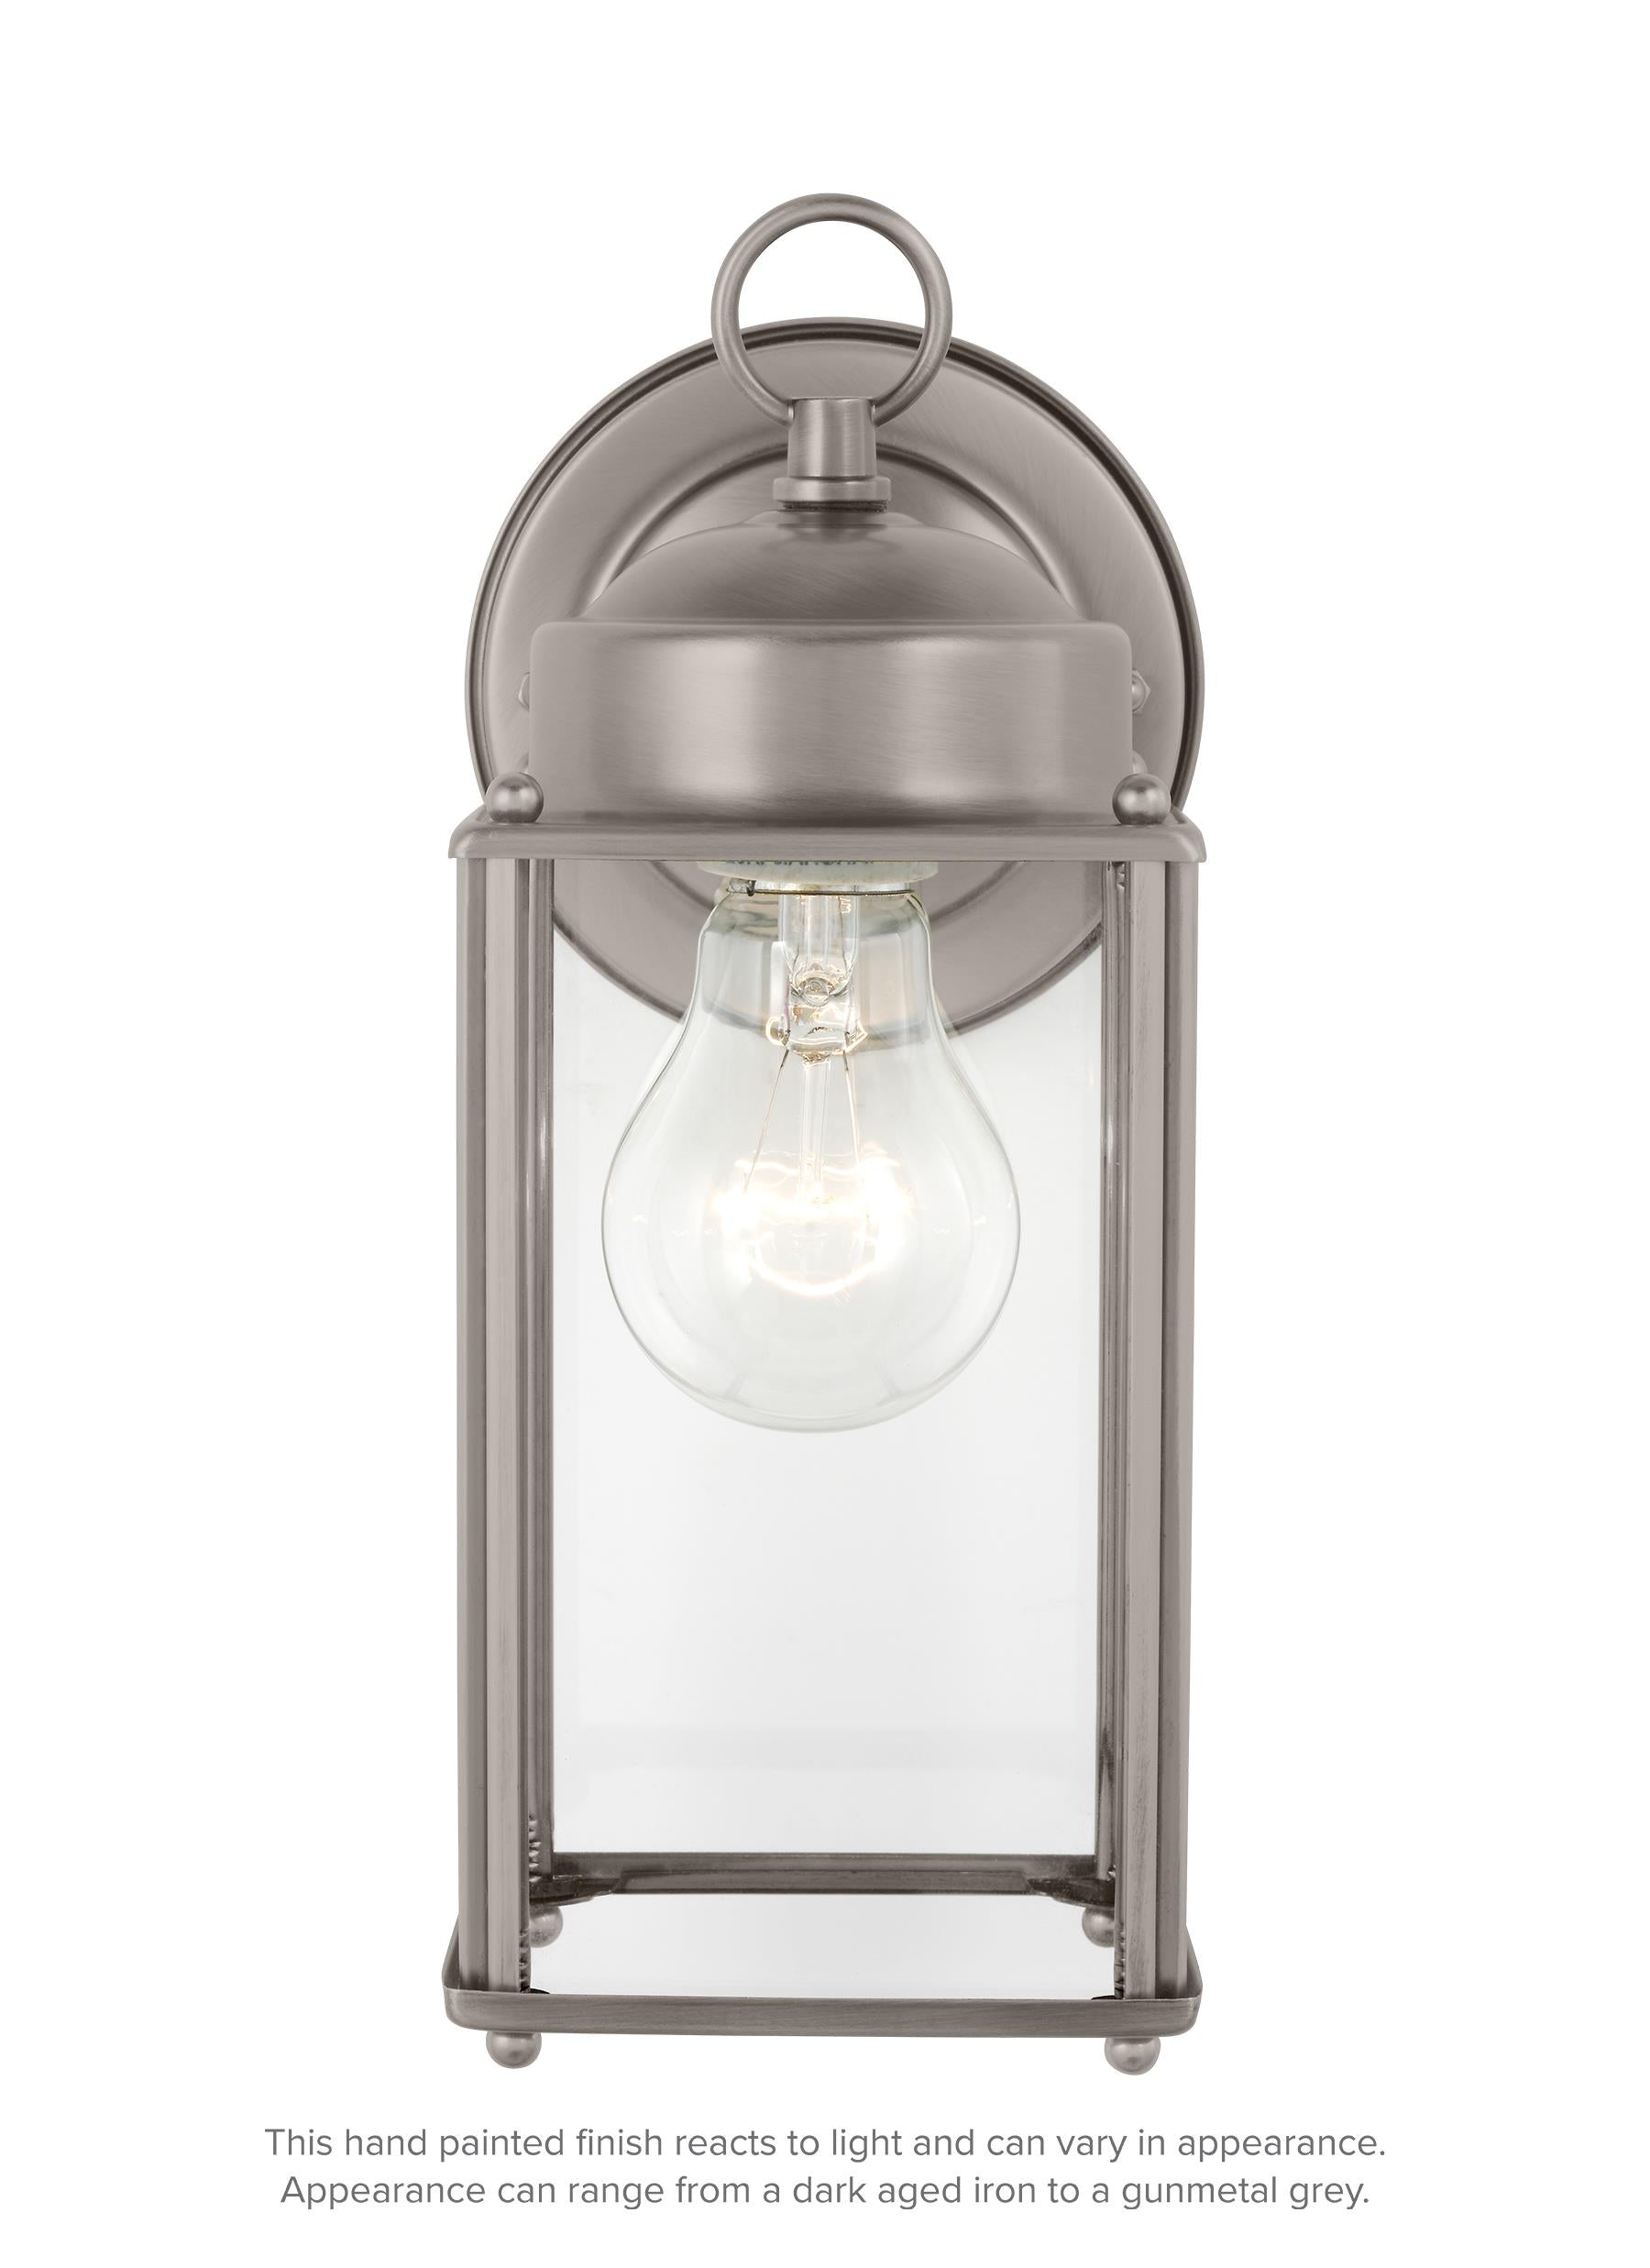 New Castle traditional 1-light outdoor exterior large wall lantern sconce in antique brushed nickel silver finish with cle...